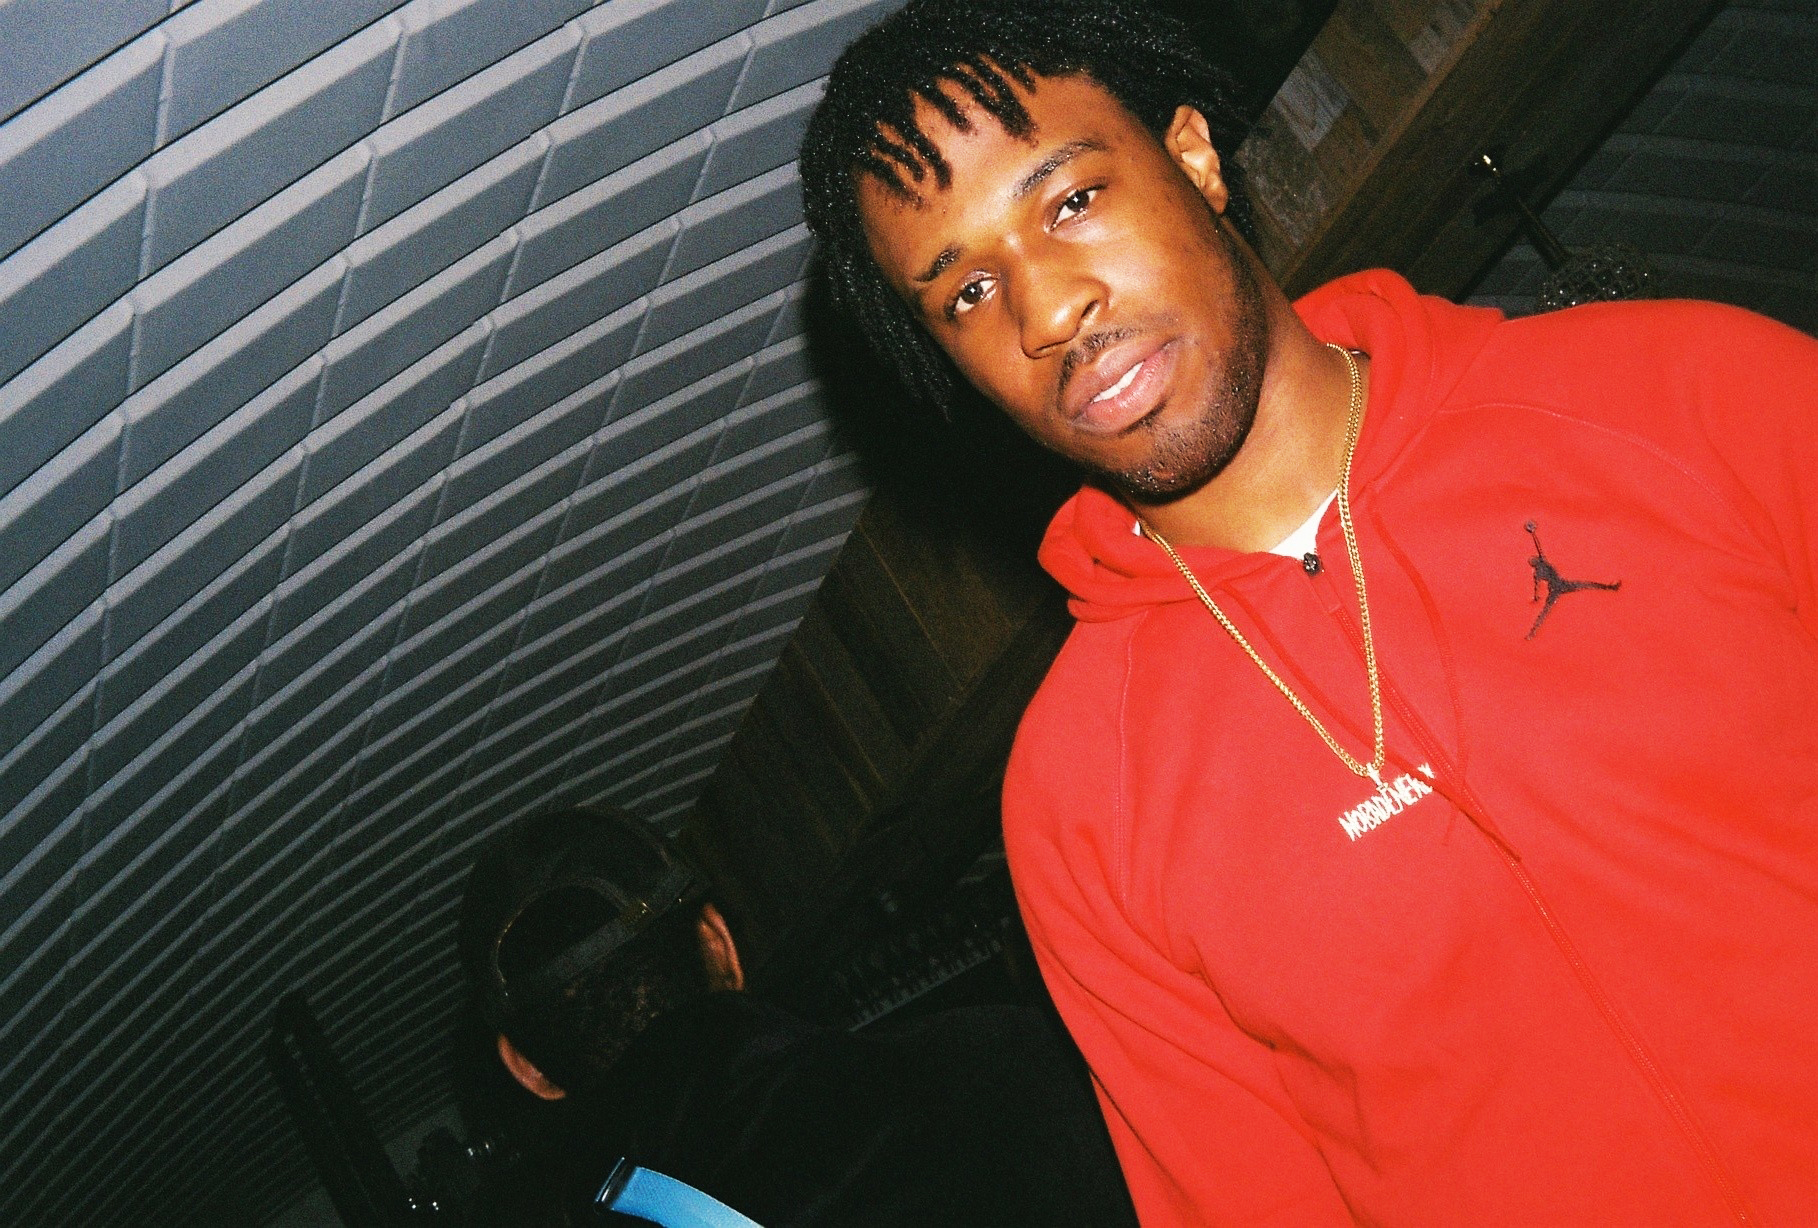 PAUSE Visits Avelino’s ‘No Bullshit’ Release Party